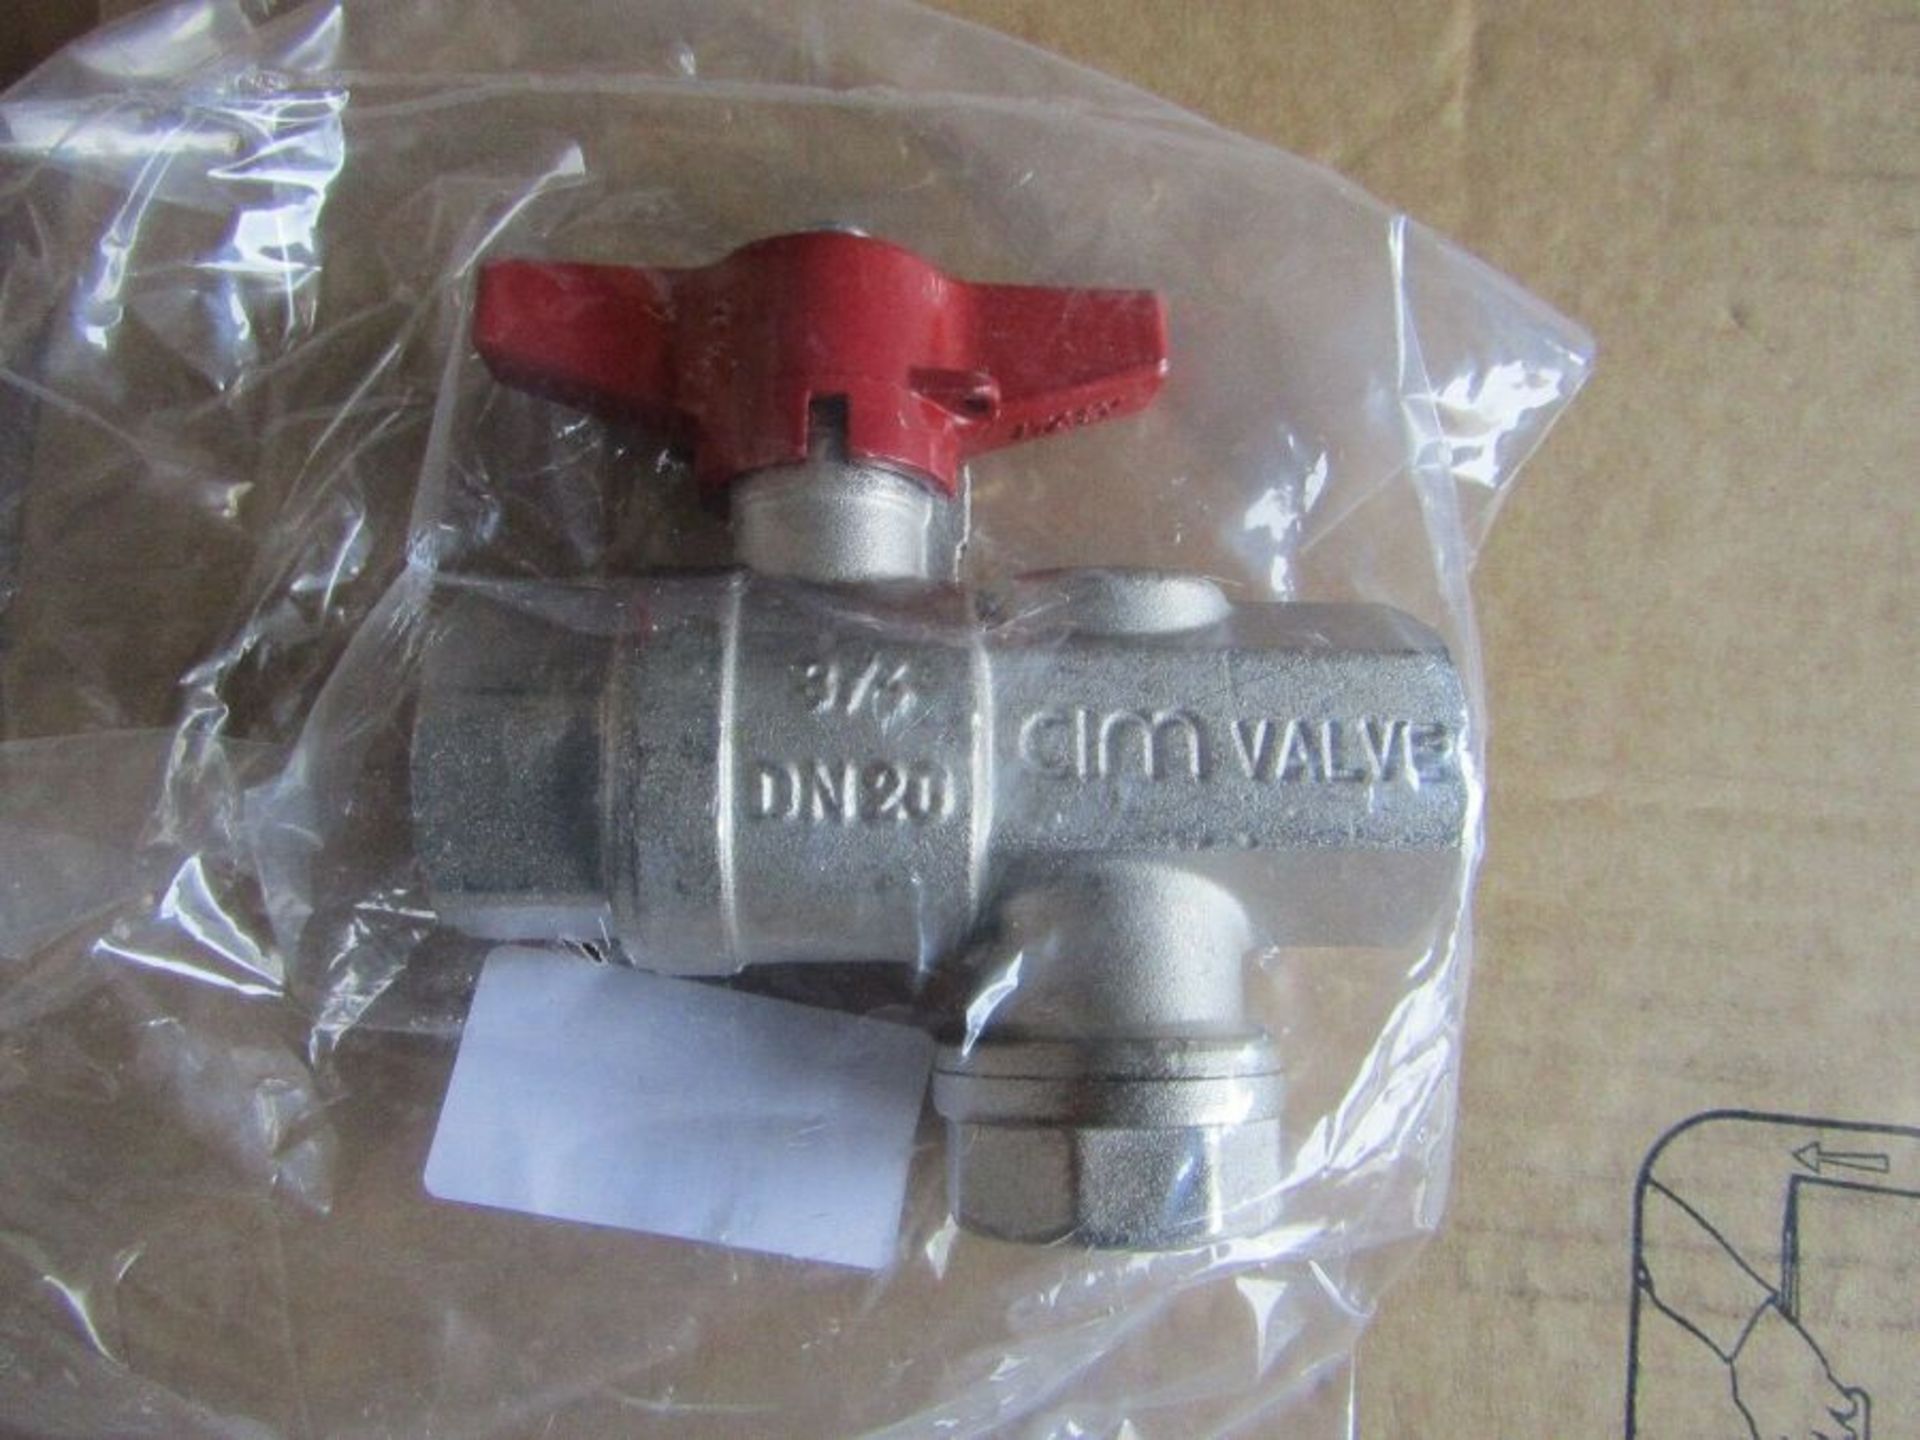 50 x High Pressure Ball Valve with strainer Brass 3/4in BSPP 2 Way - H9554 3403244 - Image 2 of 2